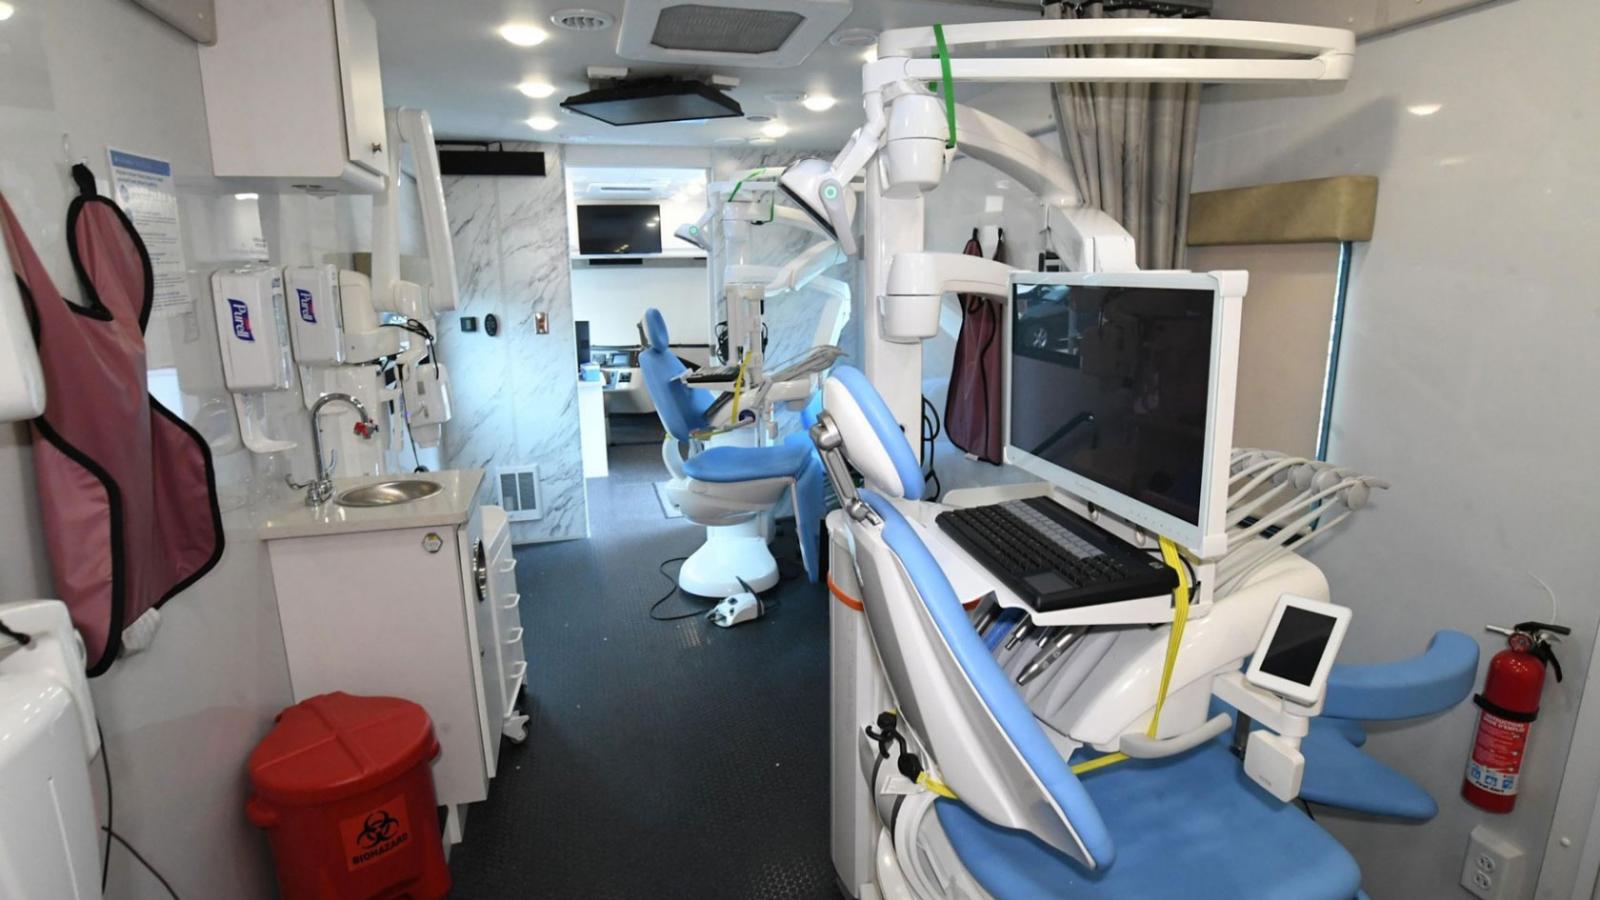 The inside of the bus for Columbia's Mobile Clinic for Community Dental Care